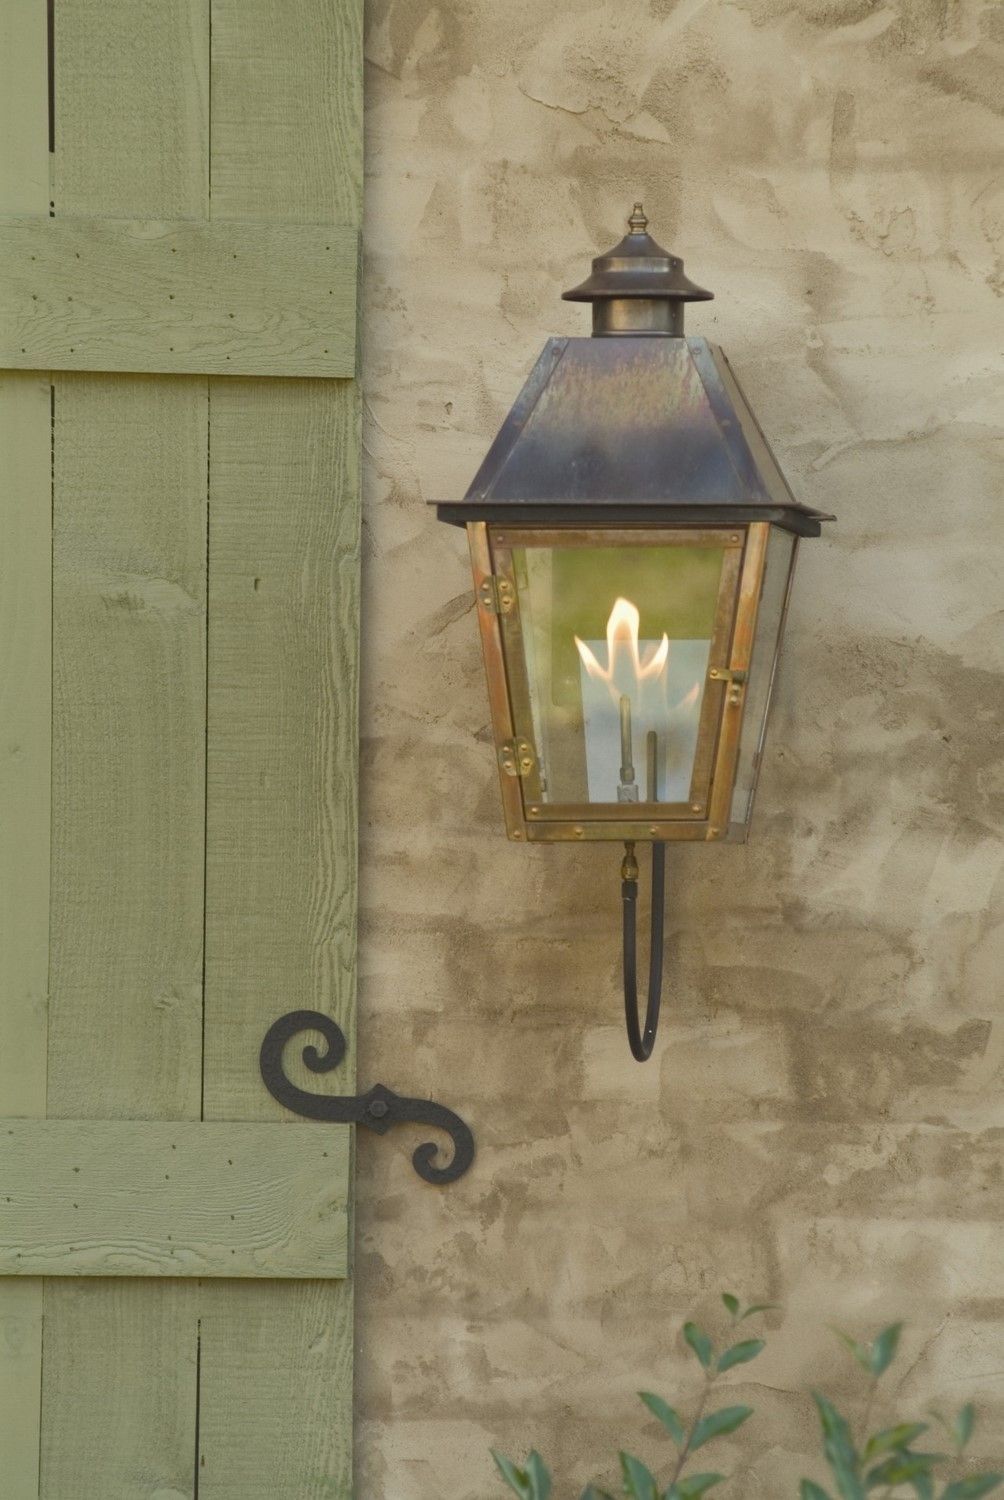 Carolina Lanterns Gas Lamp Atlas Wall Mount | Lighting | Pinterest Intended For Outdoor Wall Gas Lights (View 2 of 15)